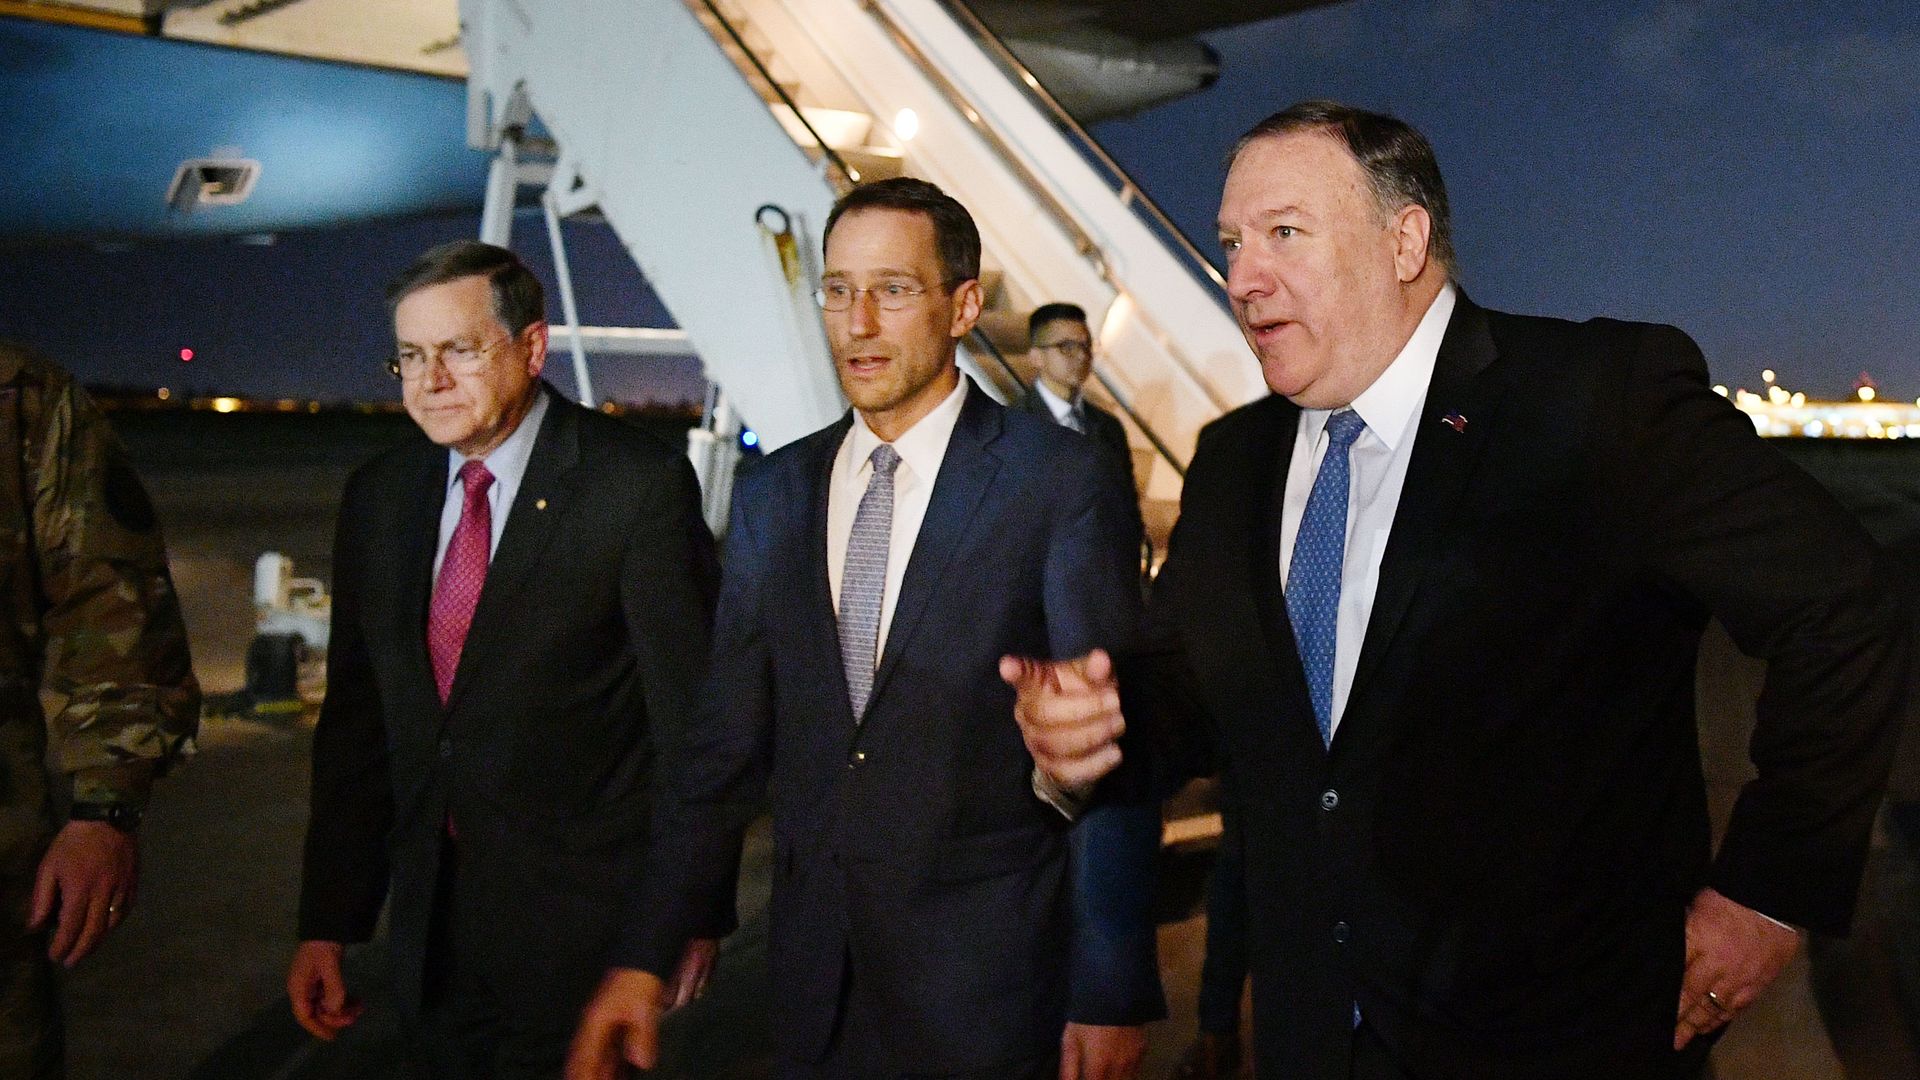 Pompeo with diplomats in Iraq